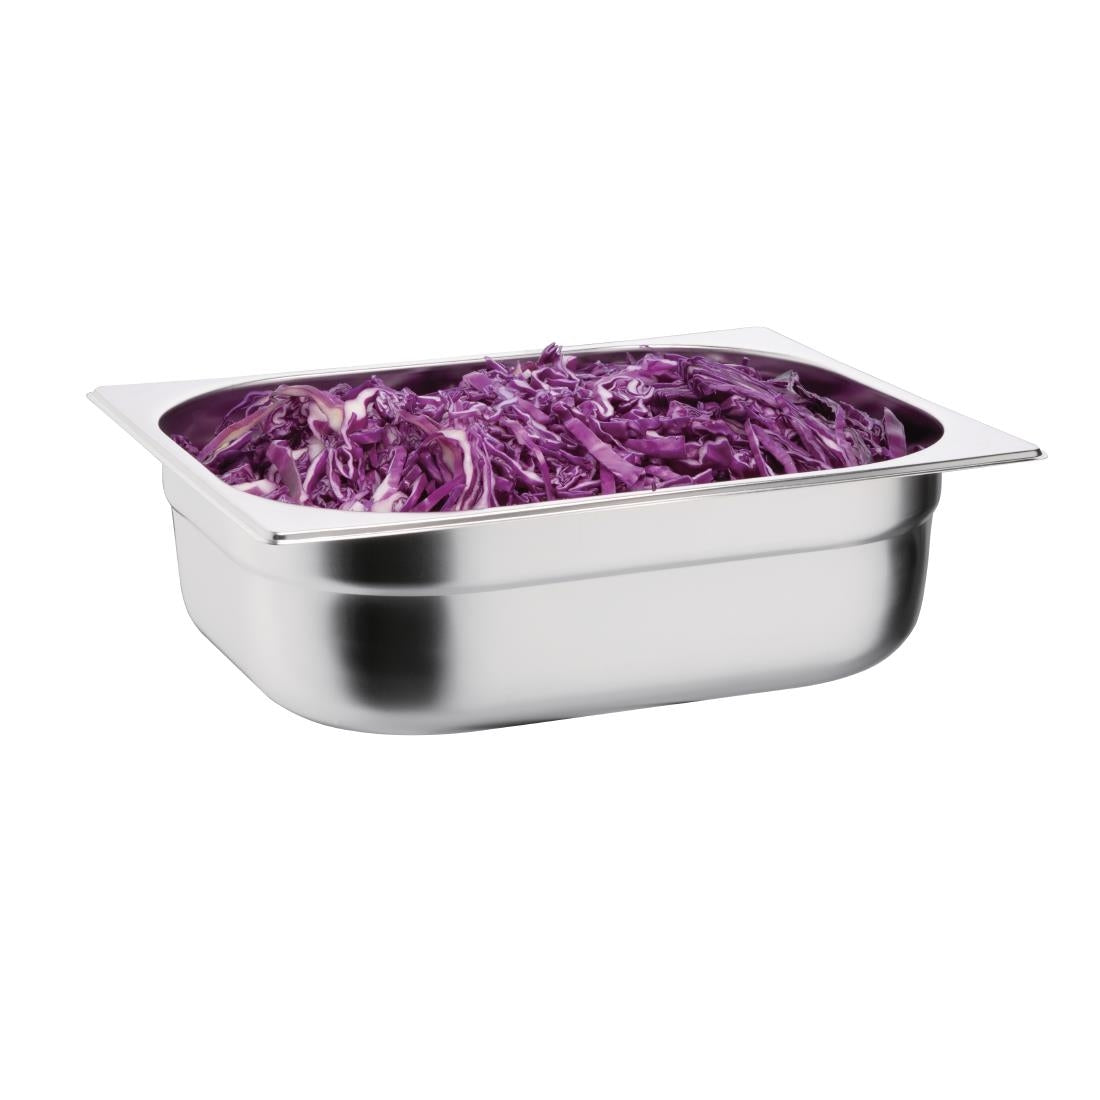 Vogue Stainless Steel 1/2 Gastronorm Pan 100mm